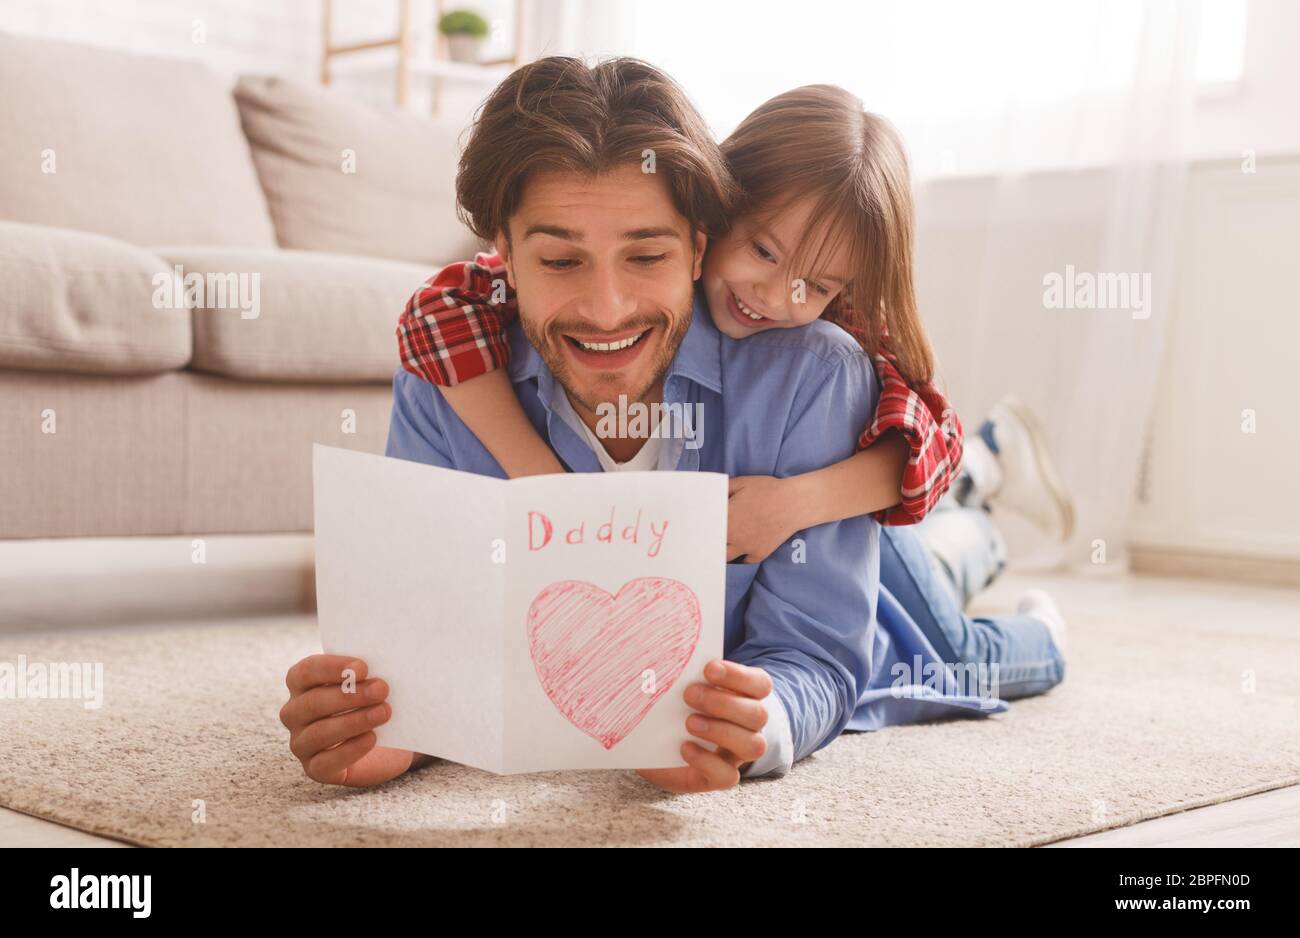 Emotional dad reading greeting card while bonding with daughter Stock Photo